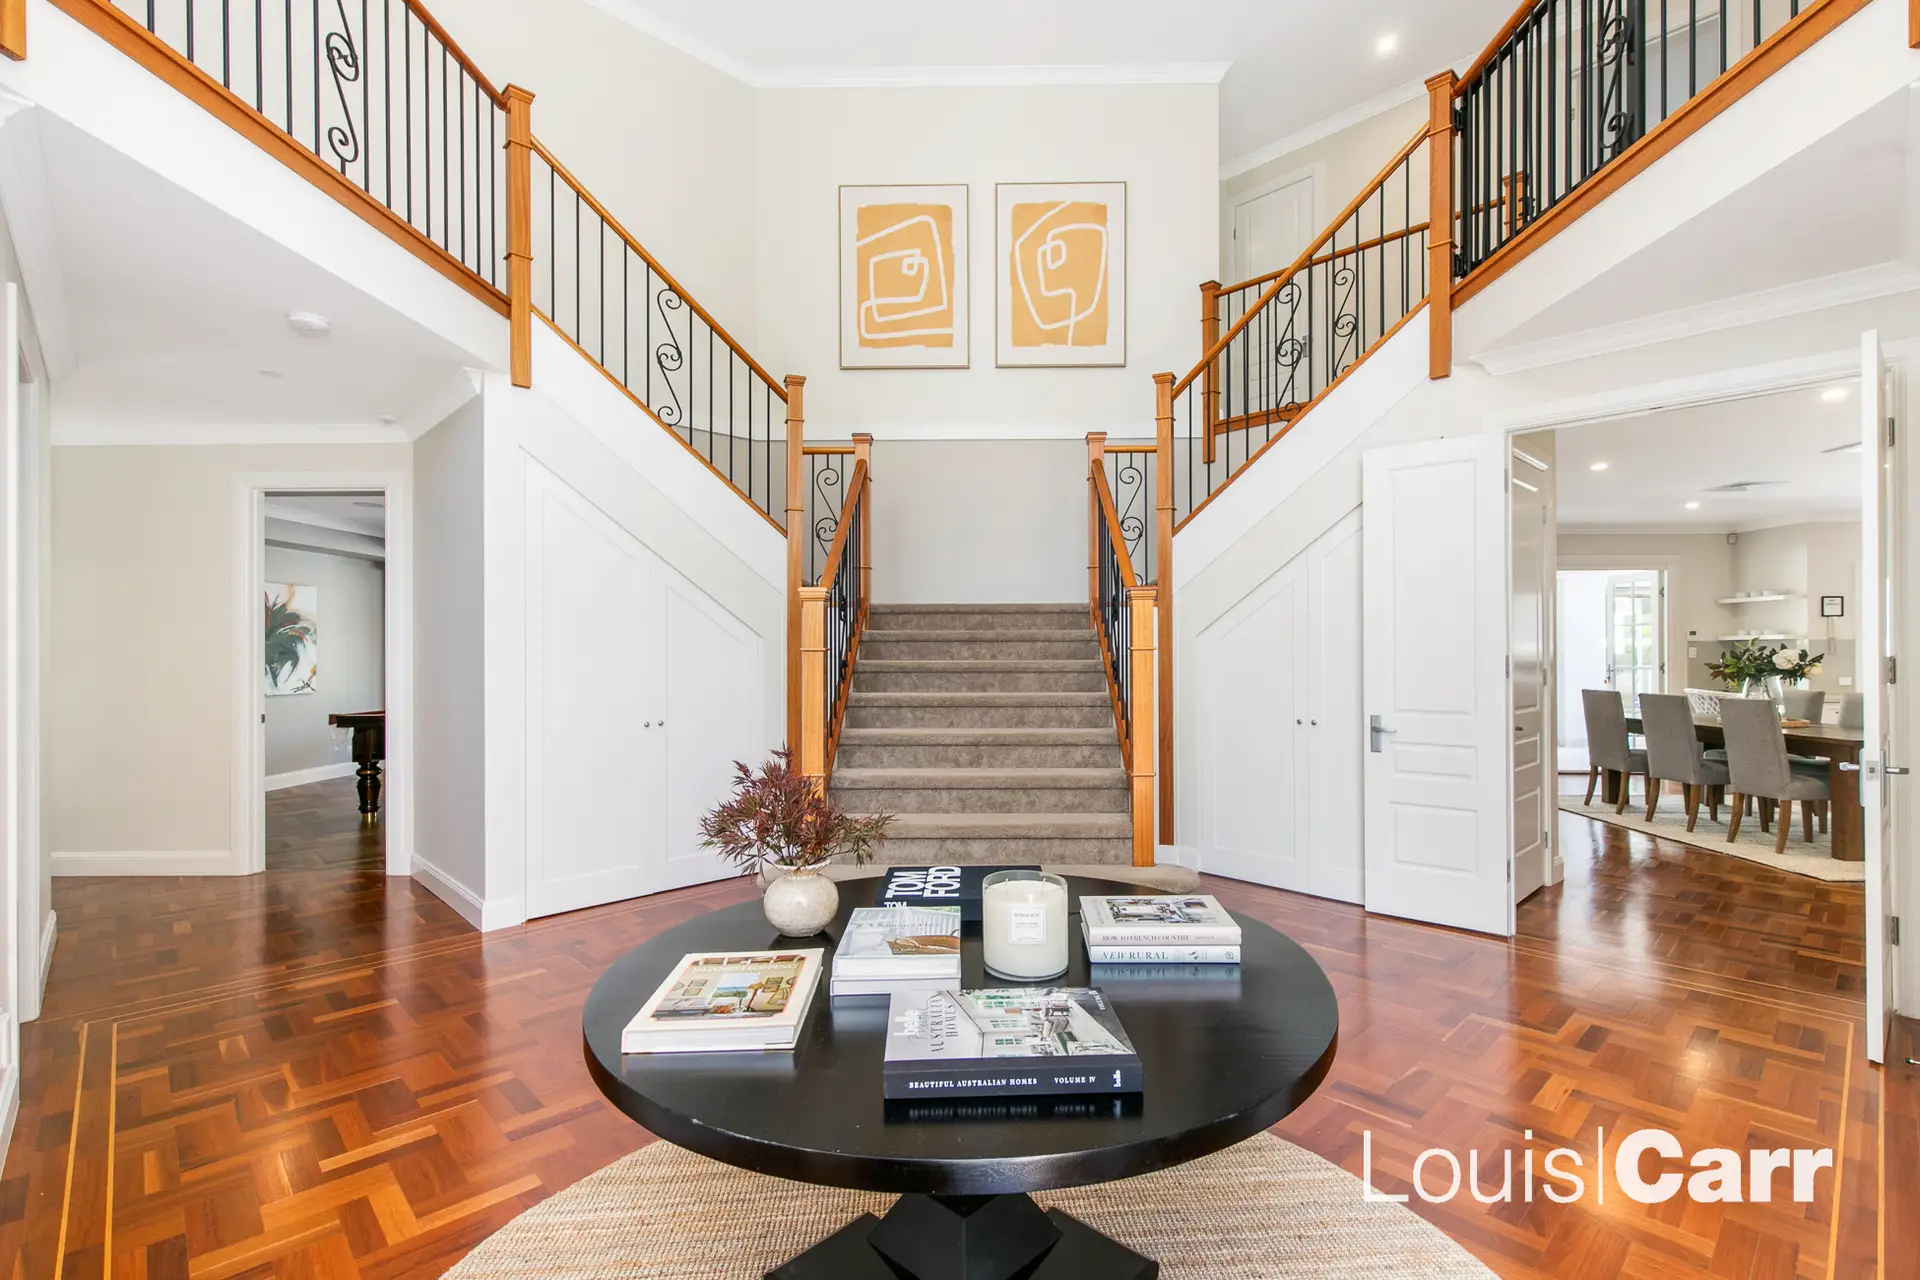 Photo #9: 23 Doris Hirst Place, West Pennant Hills - Sold by Louis Carr Real Estate